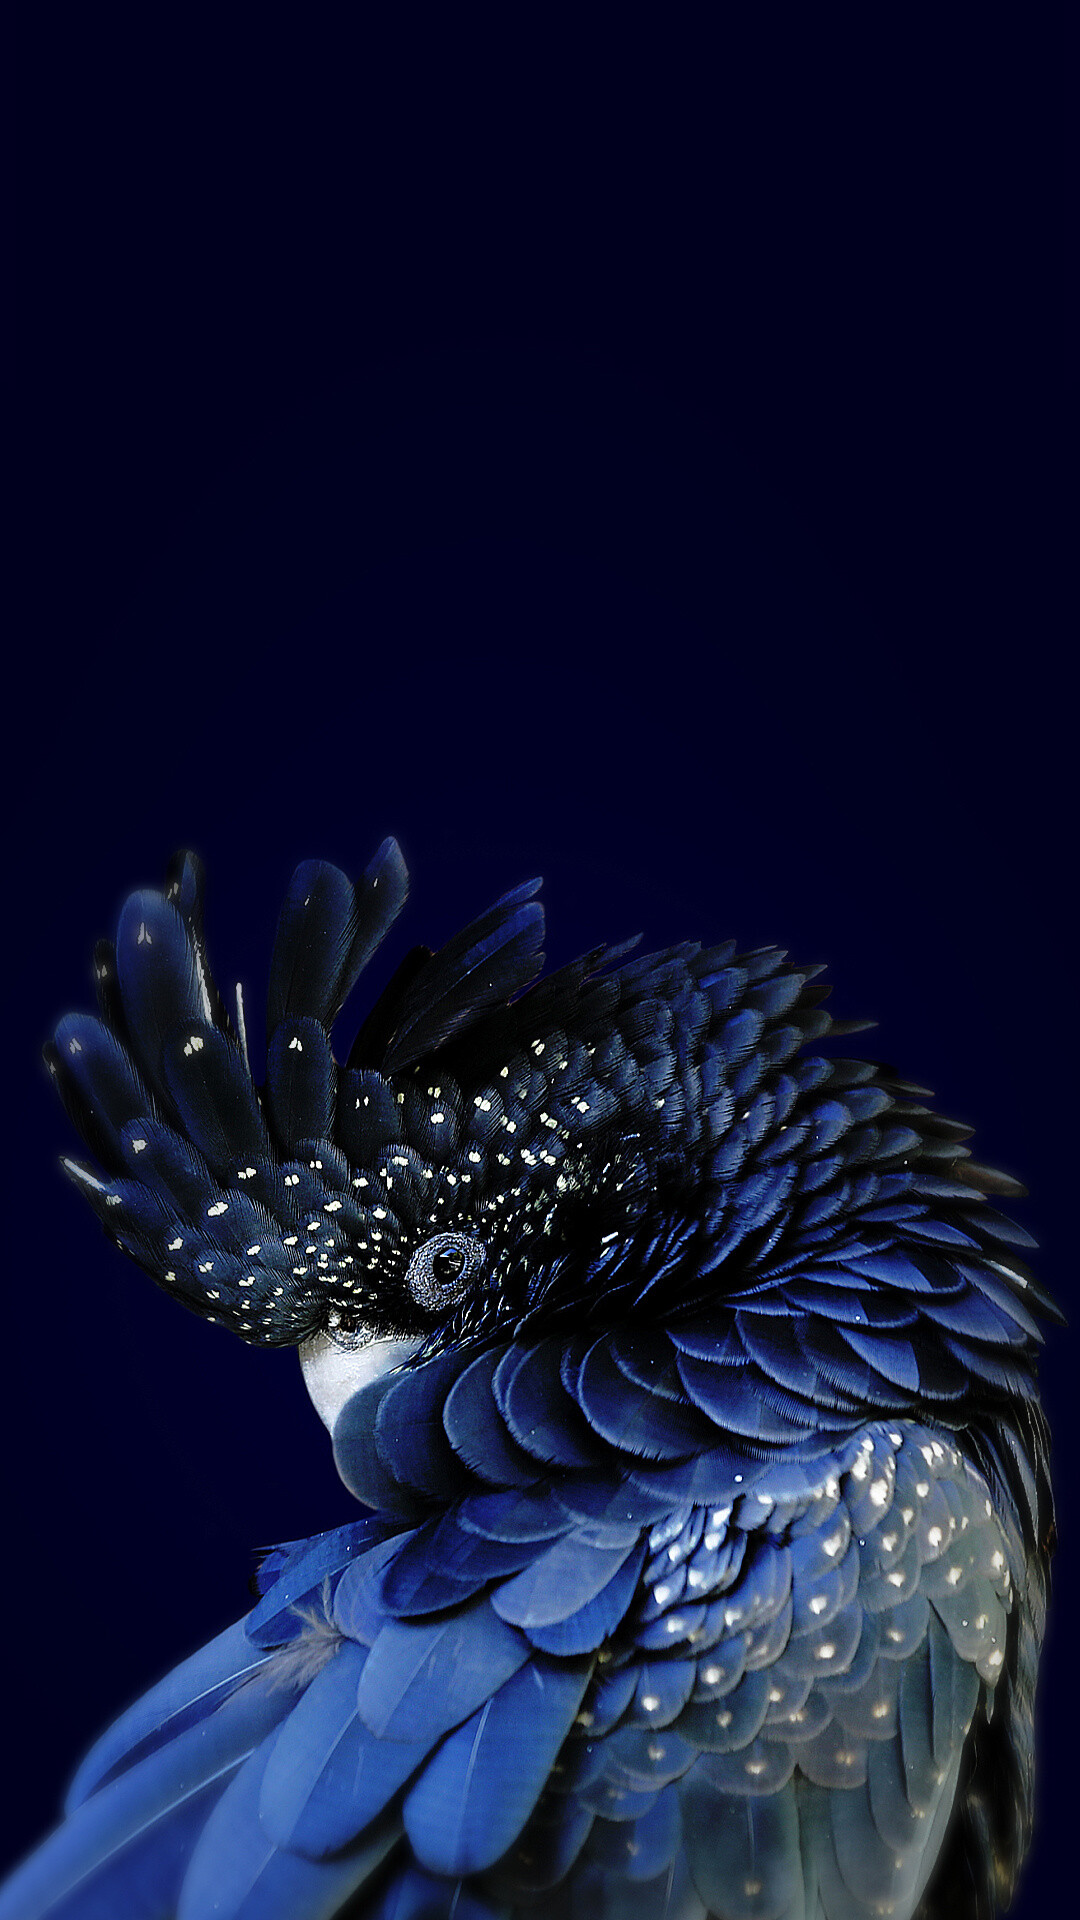 Parrot: Comprise three main lineages: Strigopoidea, Psittacoidea and Cacatuoidea. 1080x1920 Full HD Wallpaper.